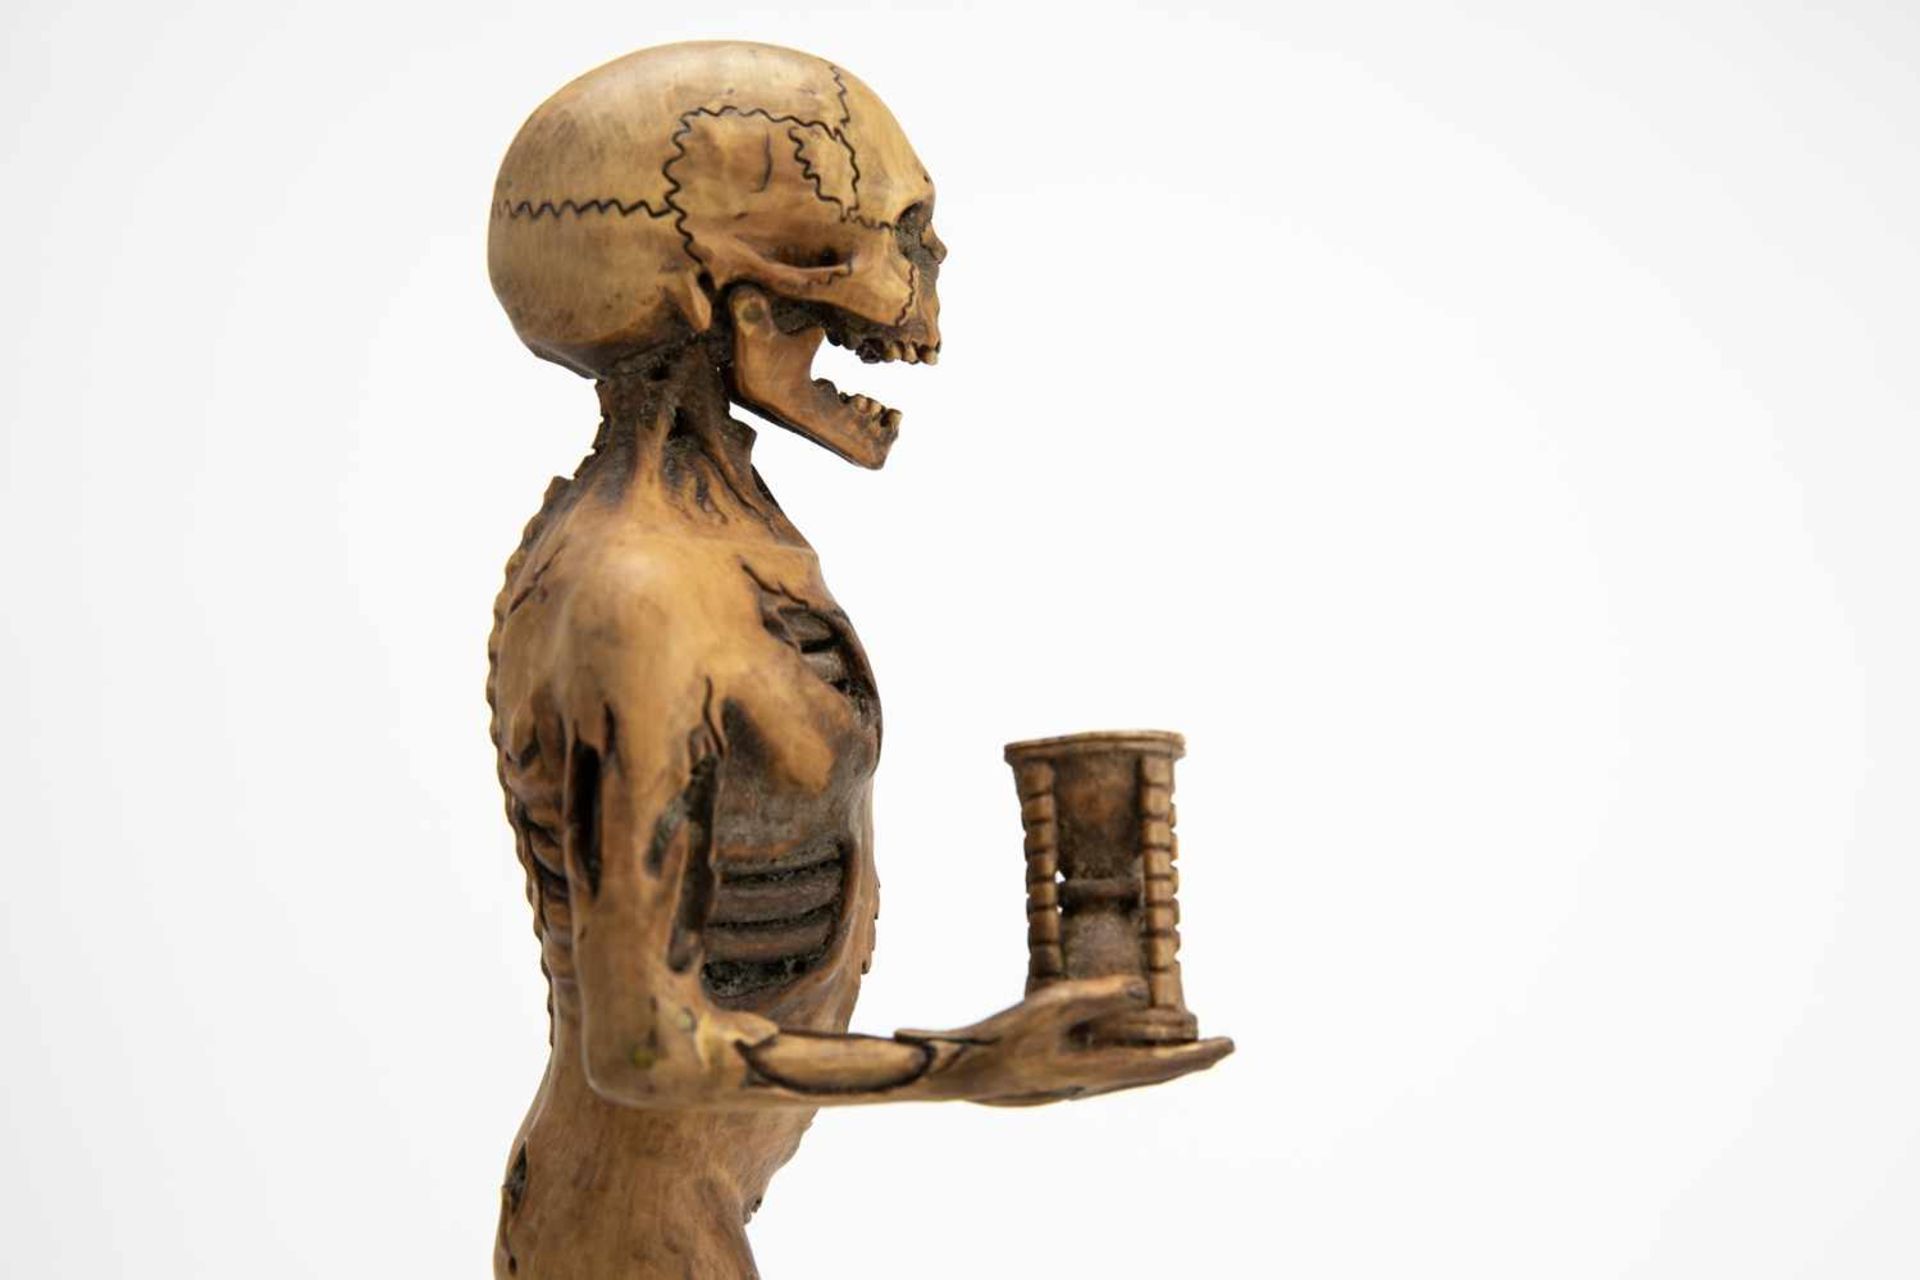 Wood carving of a small death figure with an hourglass - Bild 11 aus 17